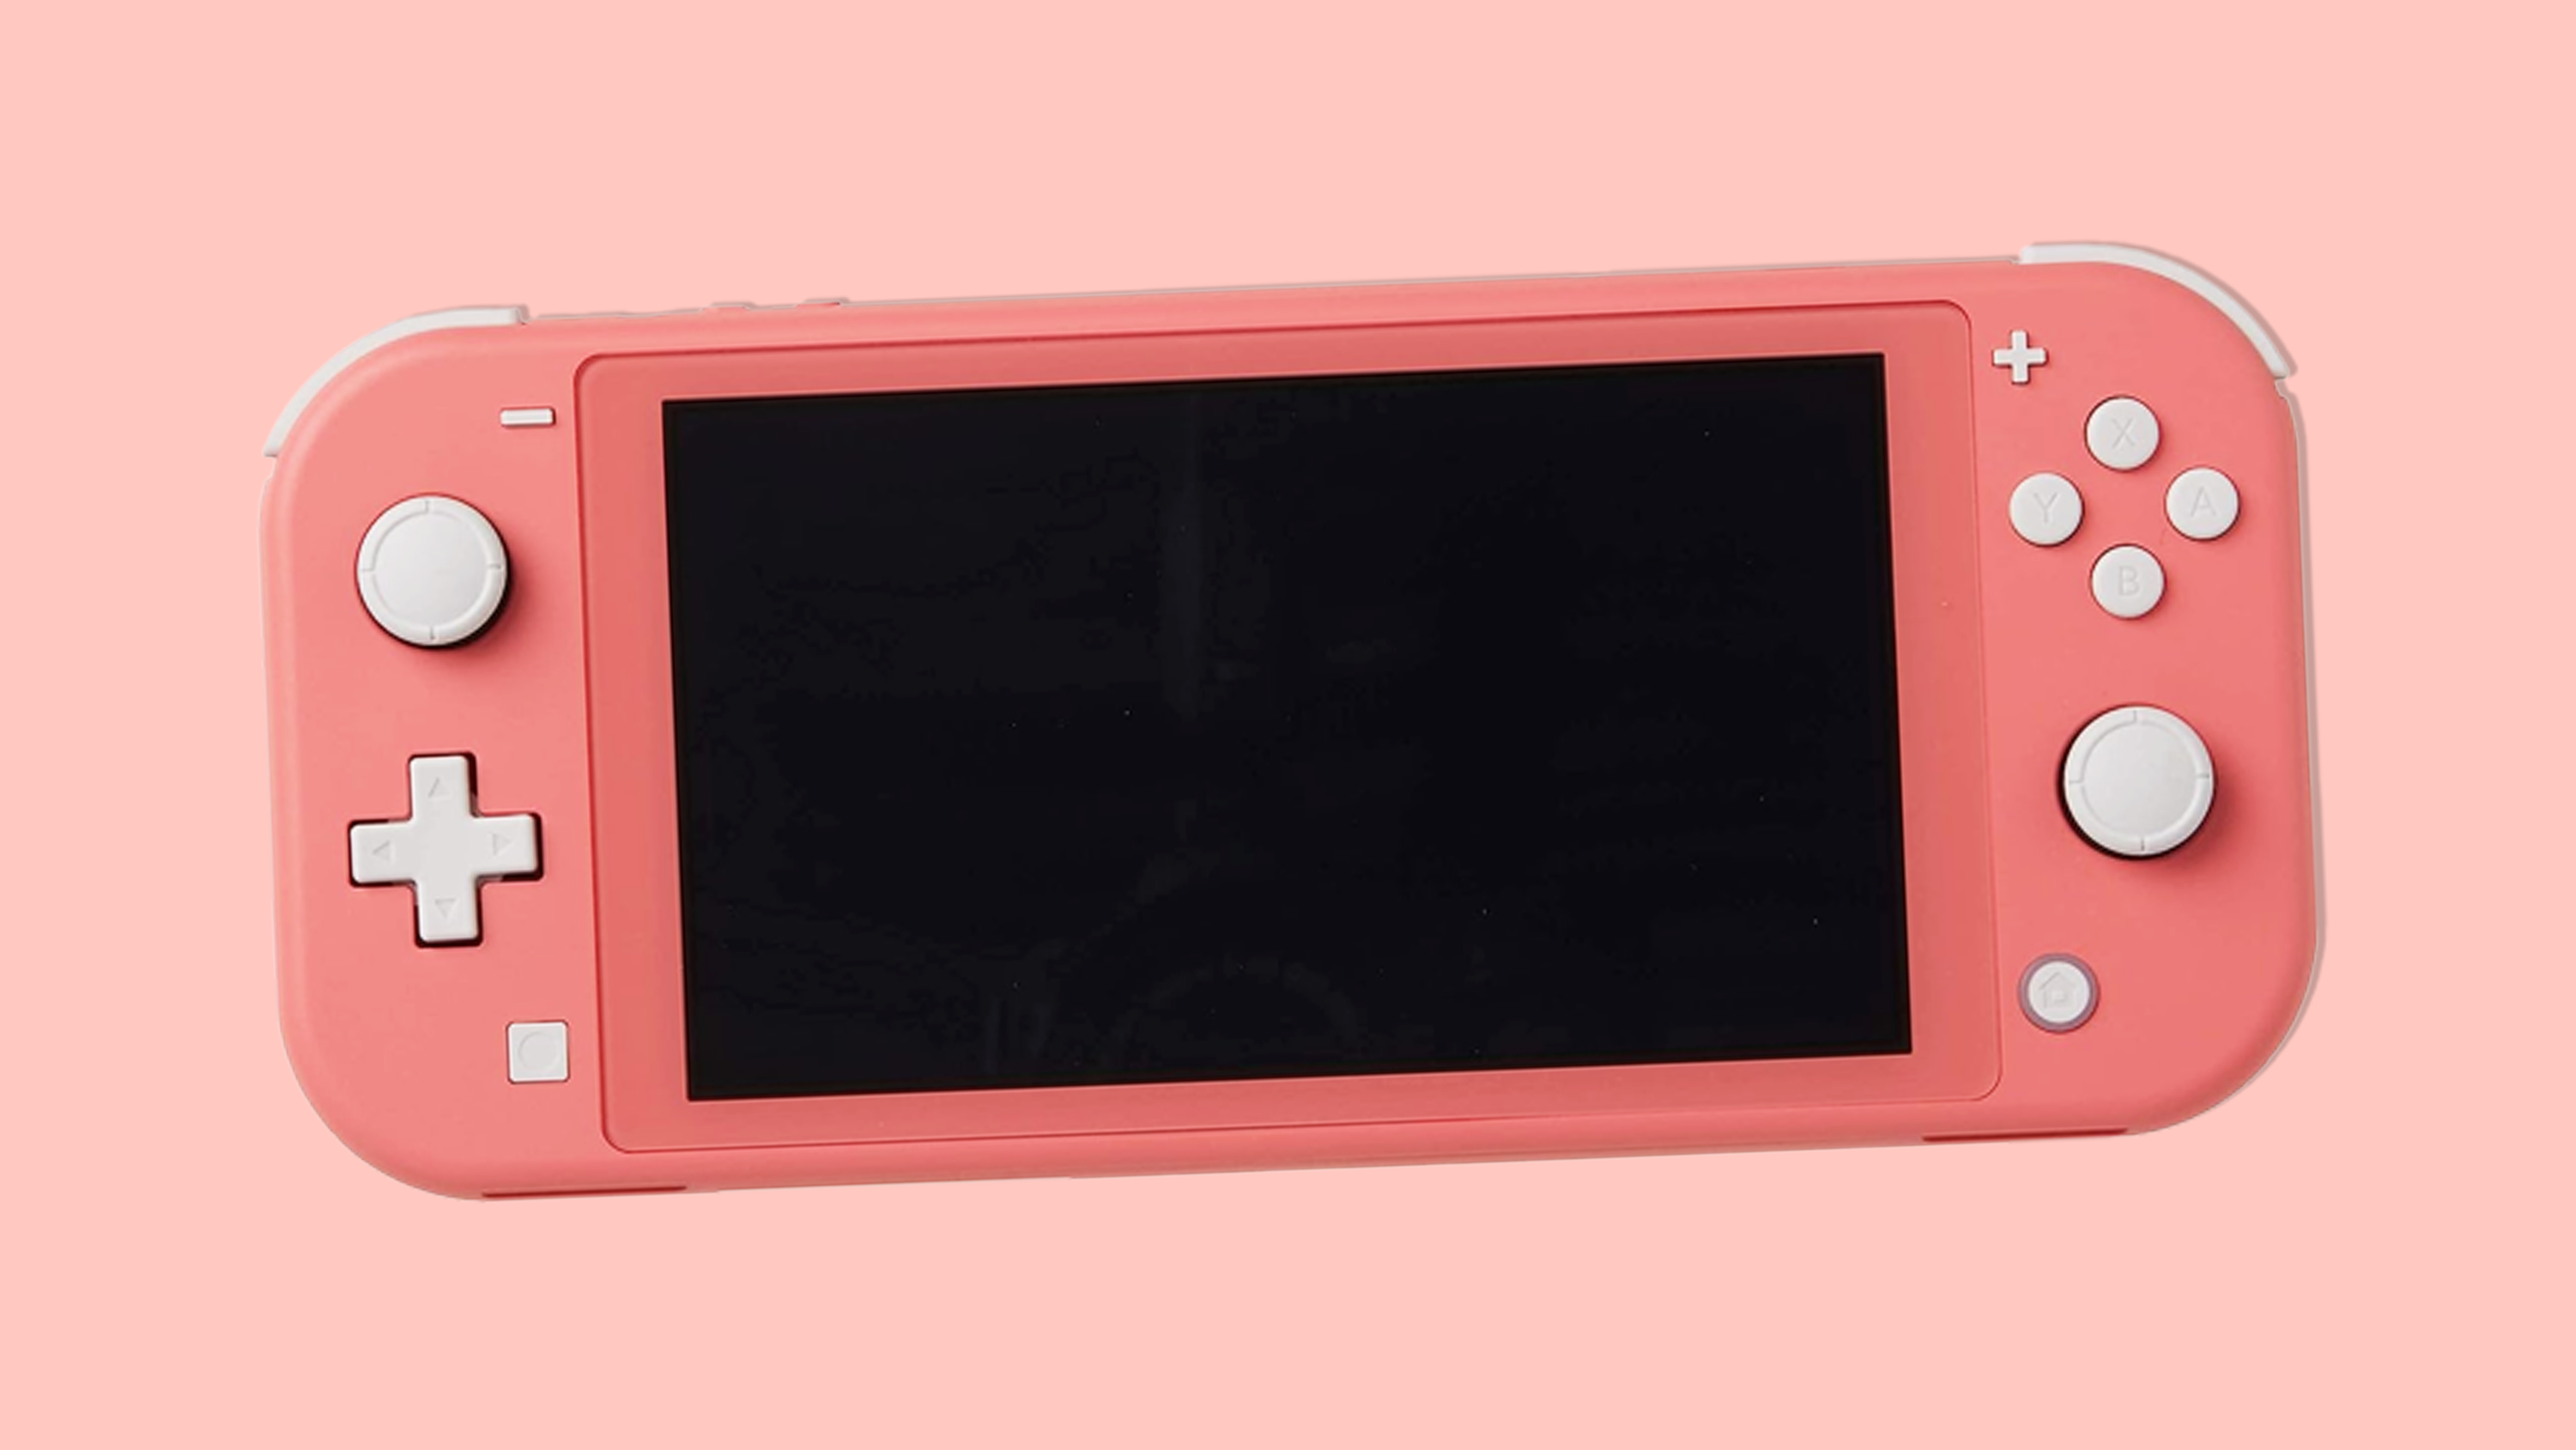 A Coral Nintendo Switch Lite on a pink background.